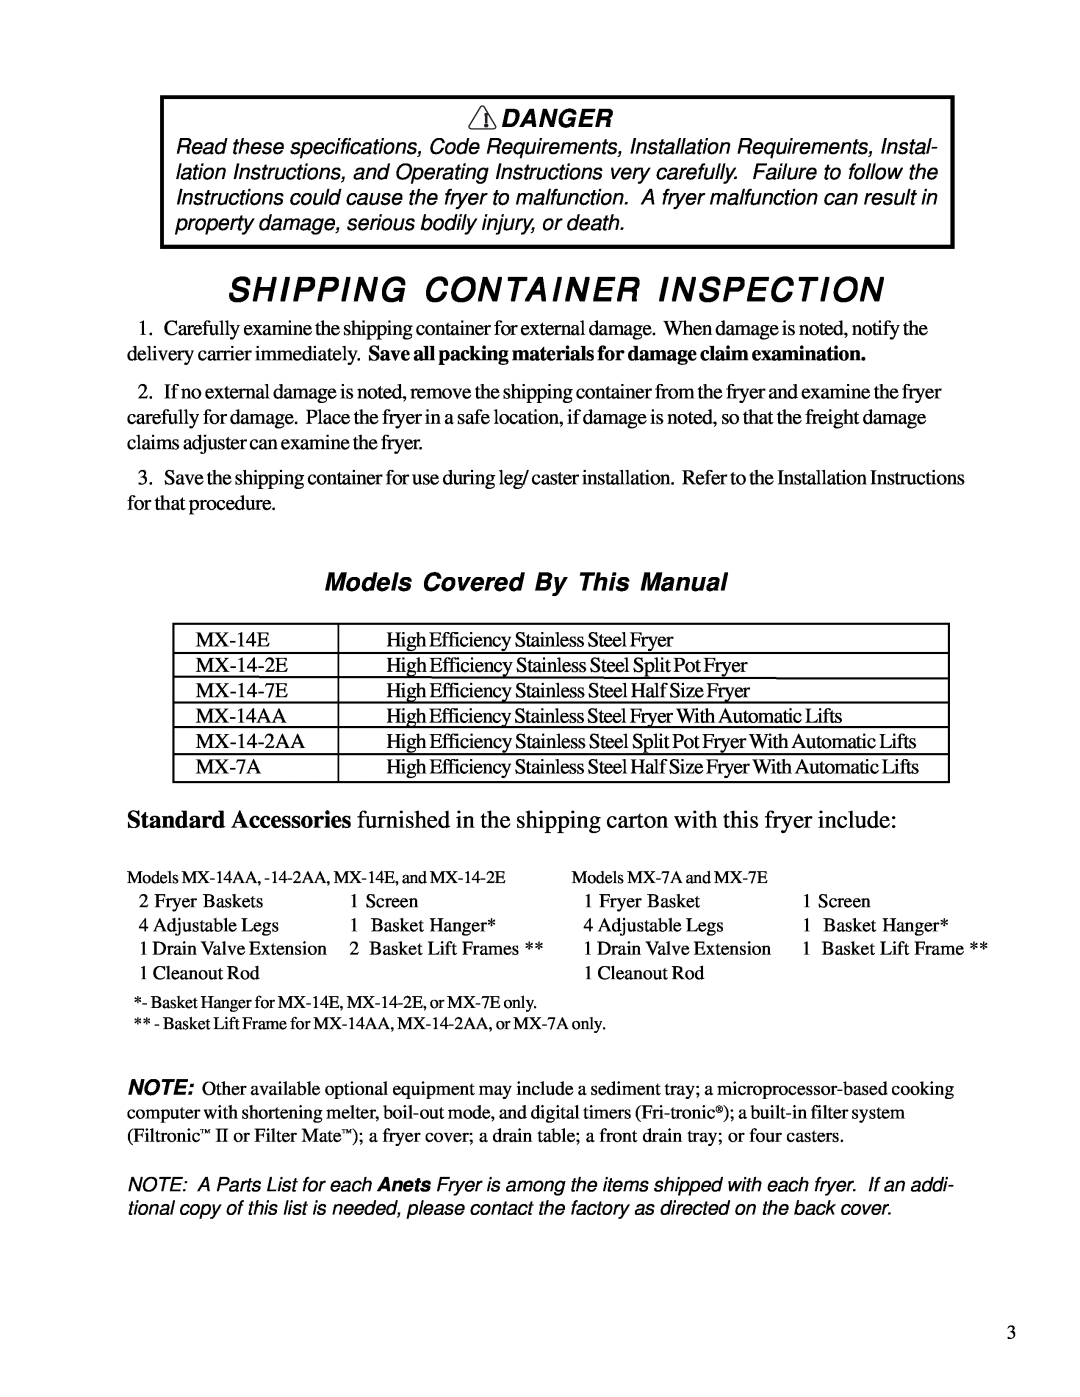 Anetsberger Brothers MX-14-2E, MX-7E, MX-14E, MX-14AA Shipping Container Inspection, Models Covered By This Manual, Danger 